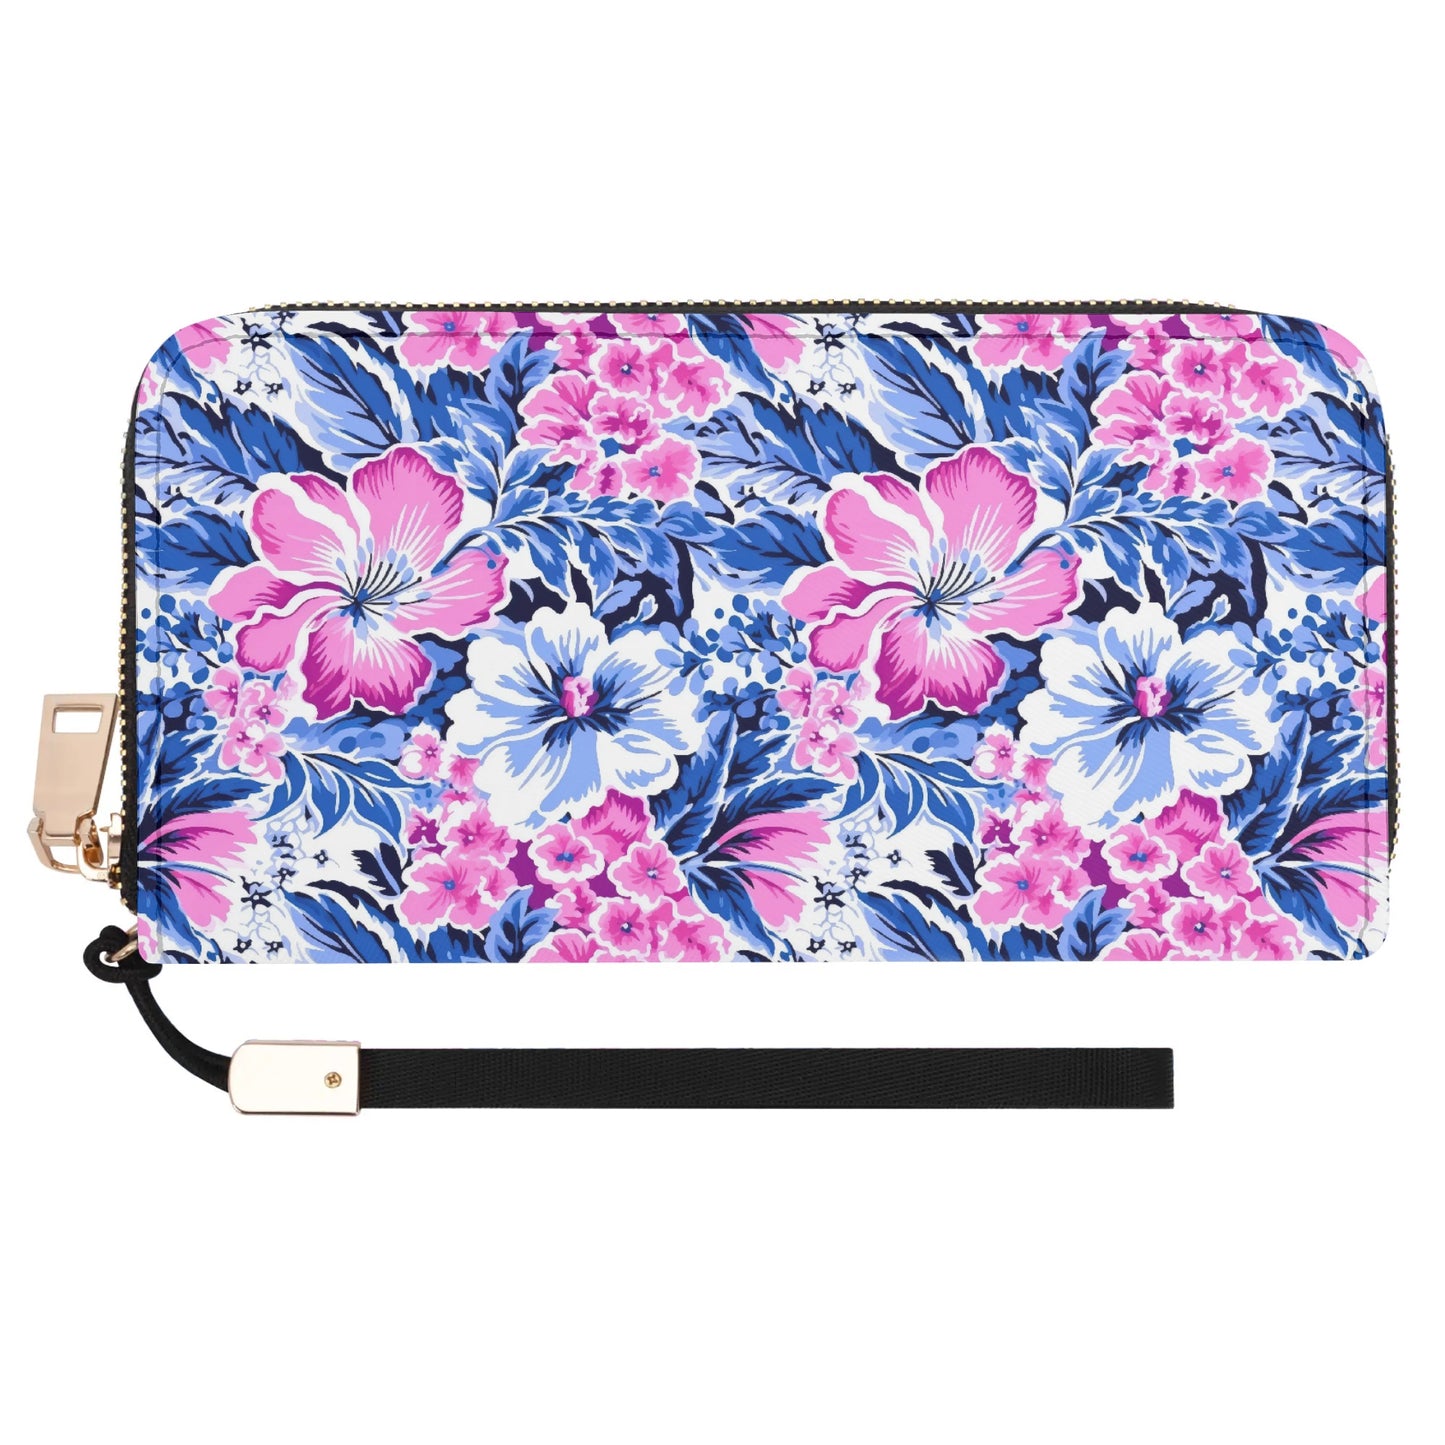 Bright Blooms: Pink and Blue Watercolor Hibiscus in Vivid Splendor Wristlet Wallet with Zipper Faux Leather (PU)